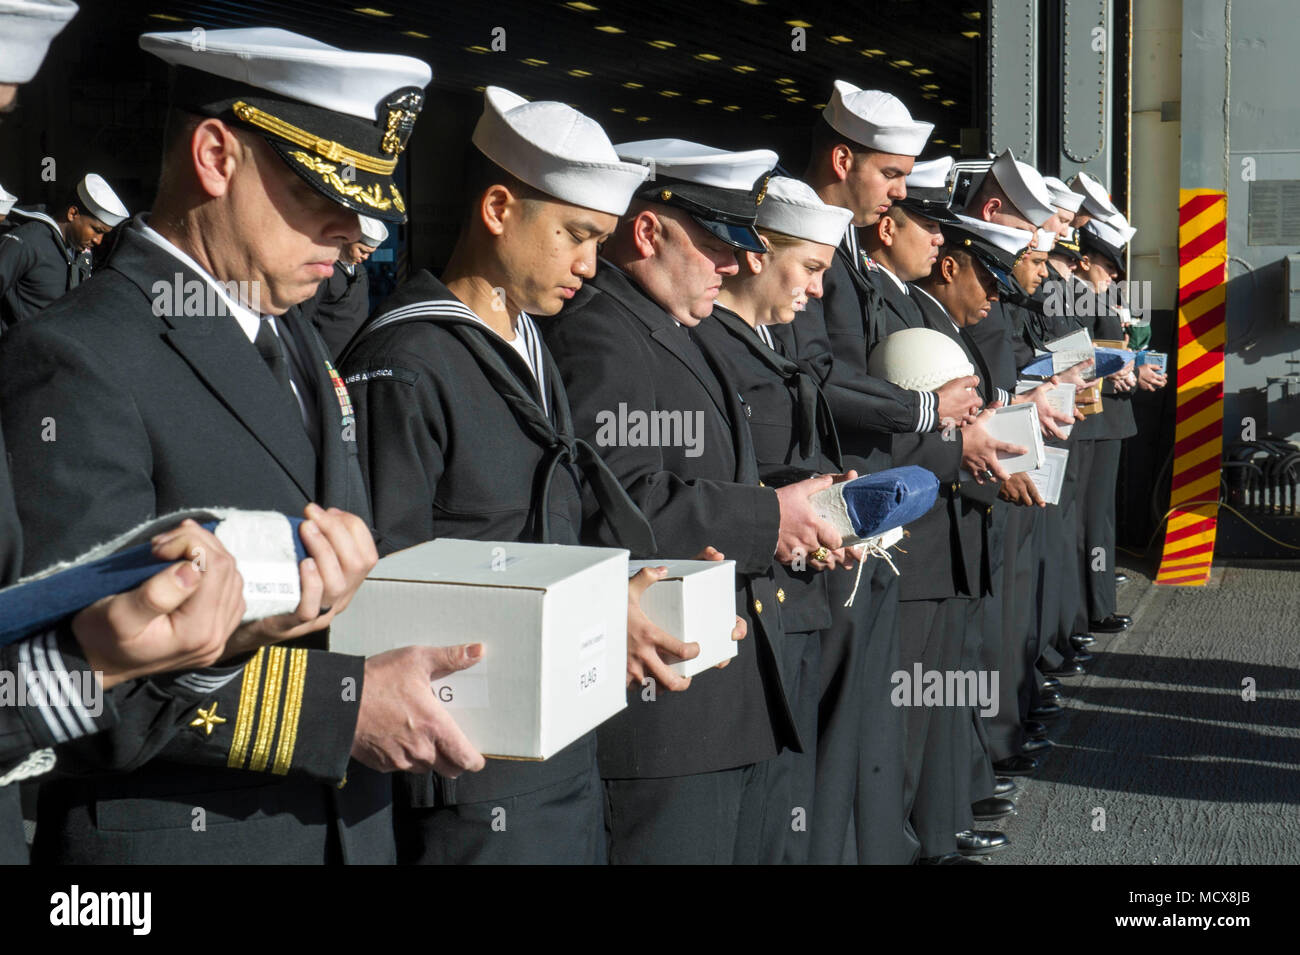 180304-N-ZS023-009  PACIFIC OCEAN (March 4, 2018) Sailors assigned to the amphibious assault ship USS America (LHA 6) bow their heads for the chaplain’s benediction during a burial-at-sea ceremony on the ship’s starboard elevator. America is underway off the coast of southern California preparing for an ammunitions offload prior to entering a planned maintenance availability period. (U.S. Navy photo by Mass Communication Specialist 3rd Class Vance Hand/Released) Stock Photo